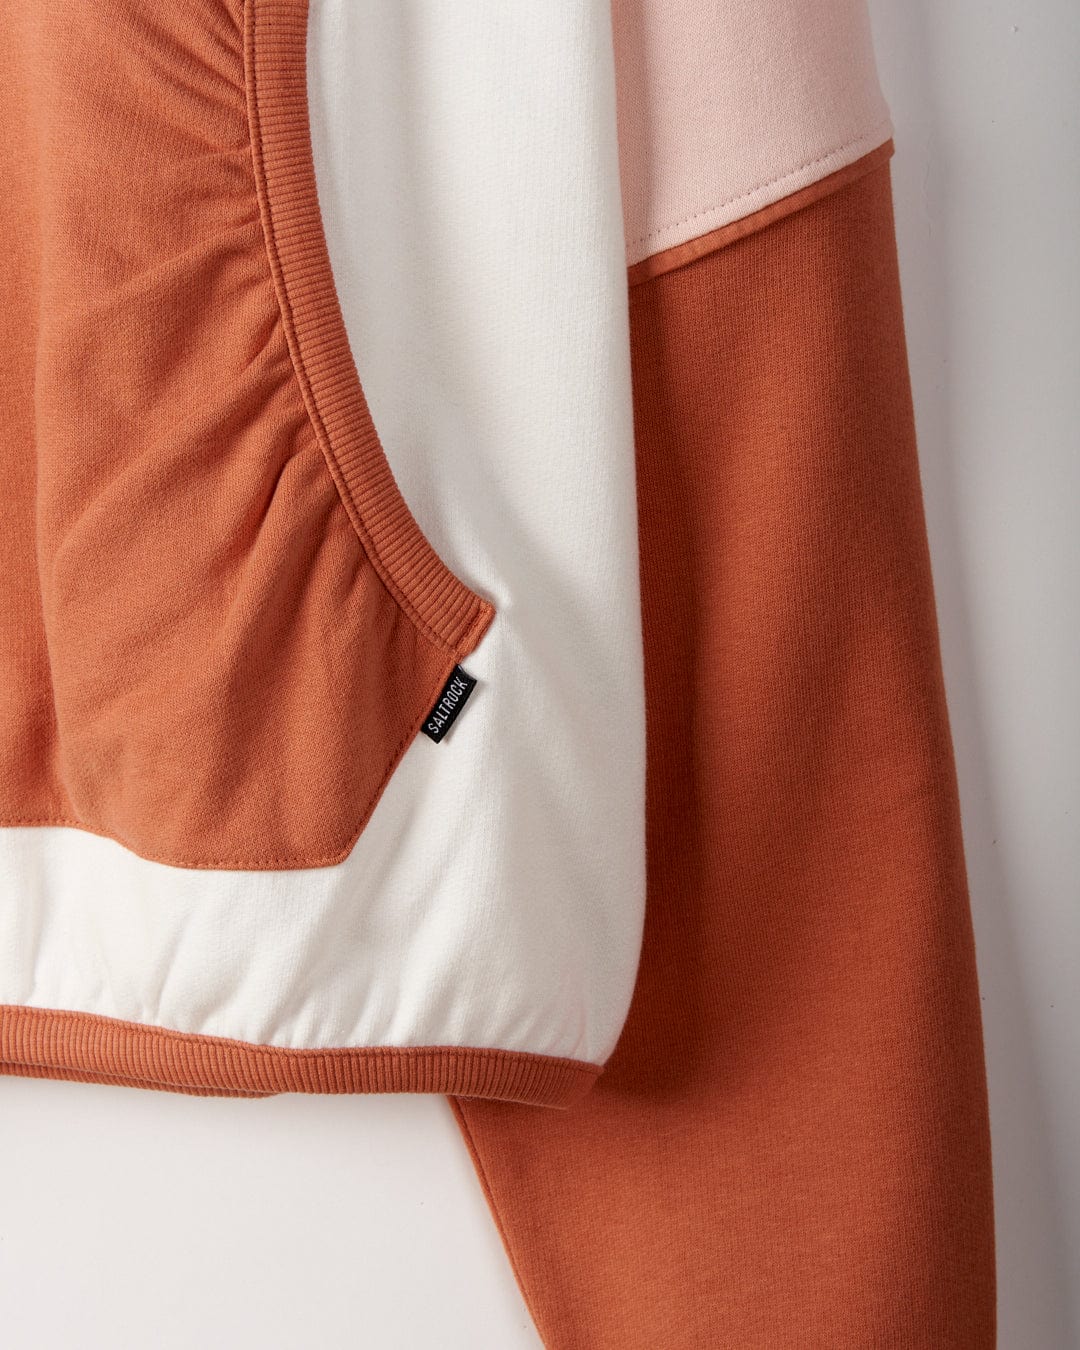 Close-up of a color-blocked garment featuring white, light pink, and rust orange cotton fabric. There is a small black tag with Saltrock branding attached near the seam, highlighting its loose fit. This piece is the Palmera - Womens Pop Hoodie - Cream by Saltrock.